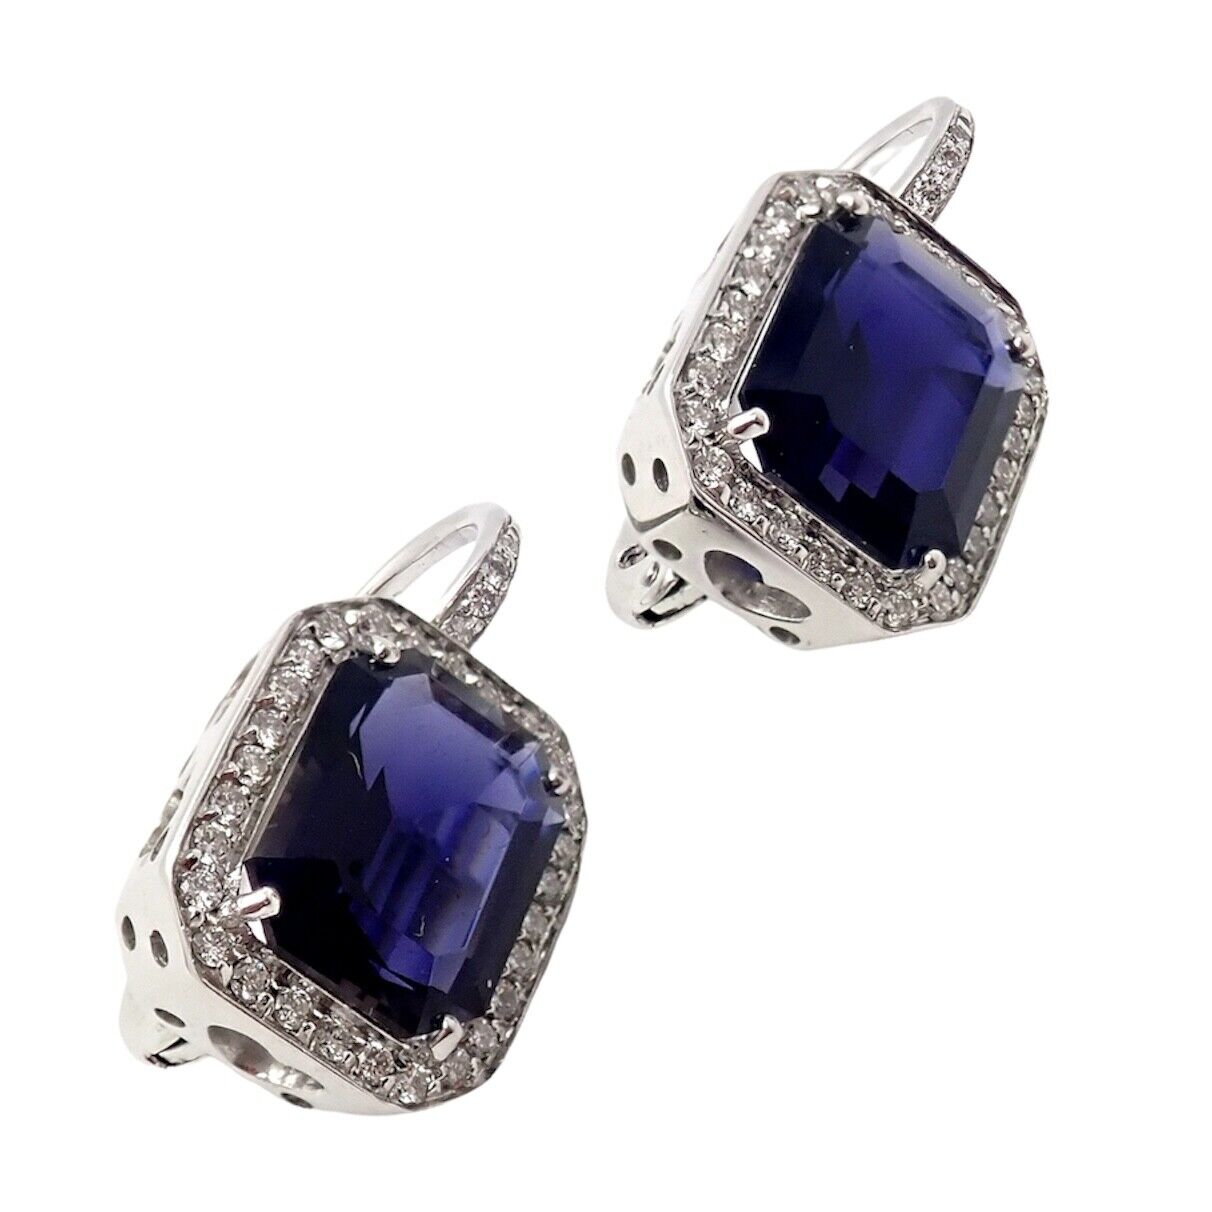 Pasquale Bruni Jewelry & Watches:Fine Jewelry:Earrings Authentic! Pasquale Bruni 18k White Gold Iolite Diamond Earrings